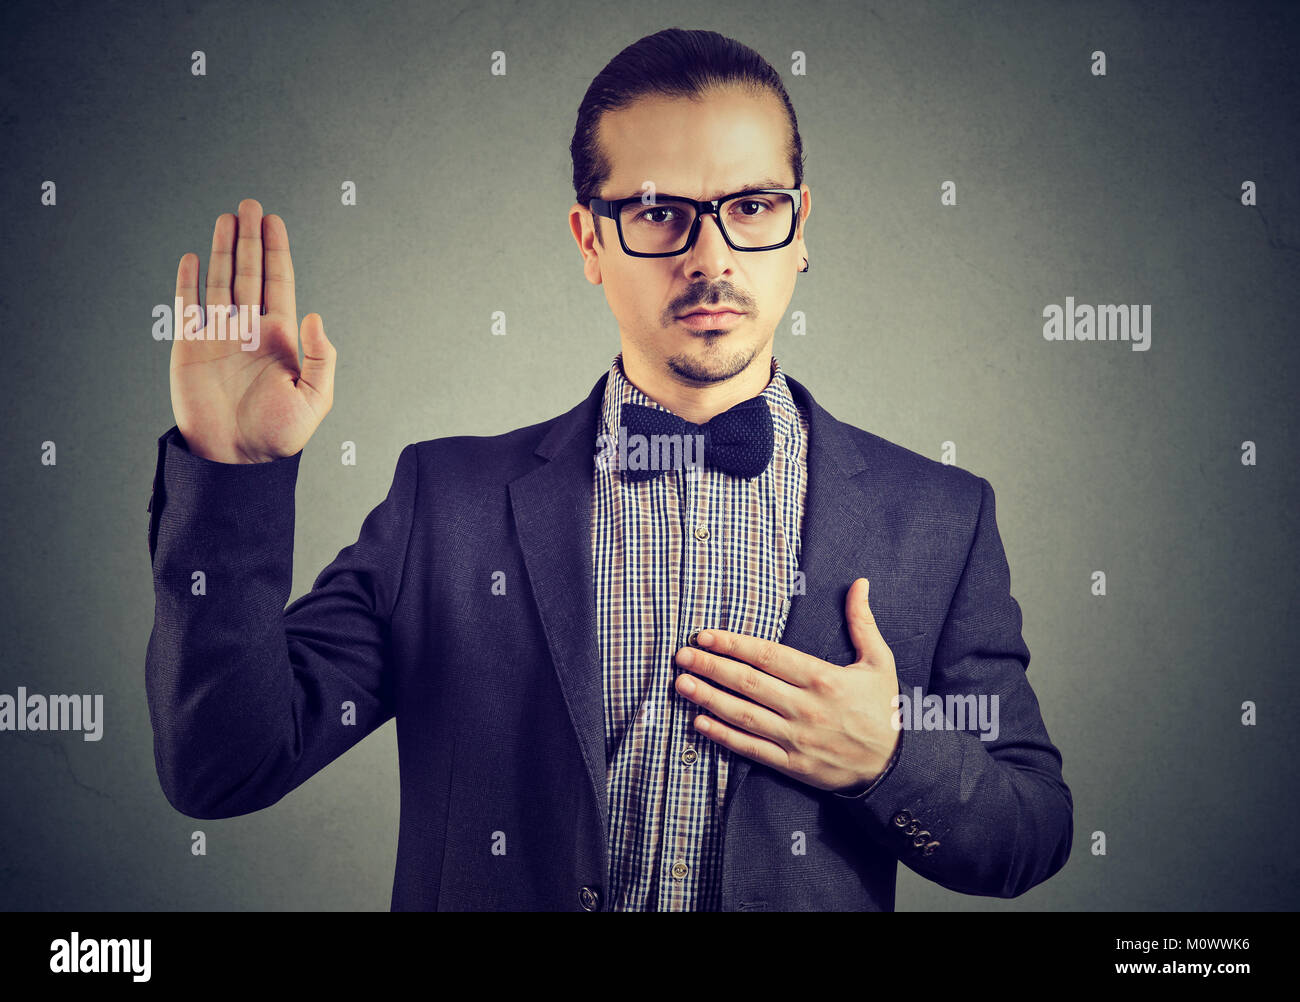 Young man in formal clothing and eyeglasses swearing in being trustworthy while looking at camera. Stock Photo